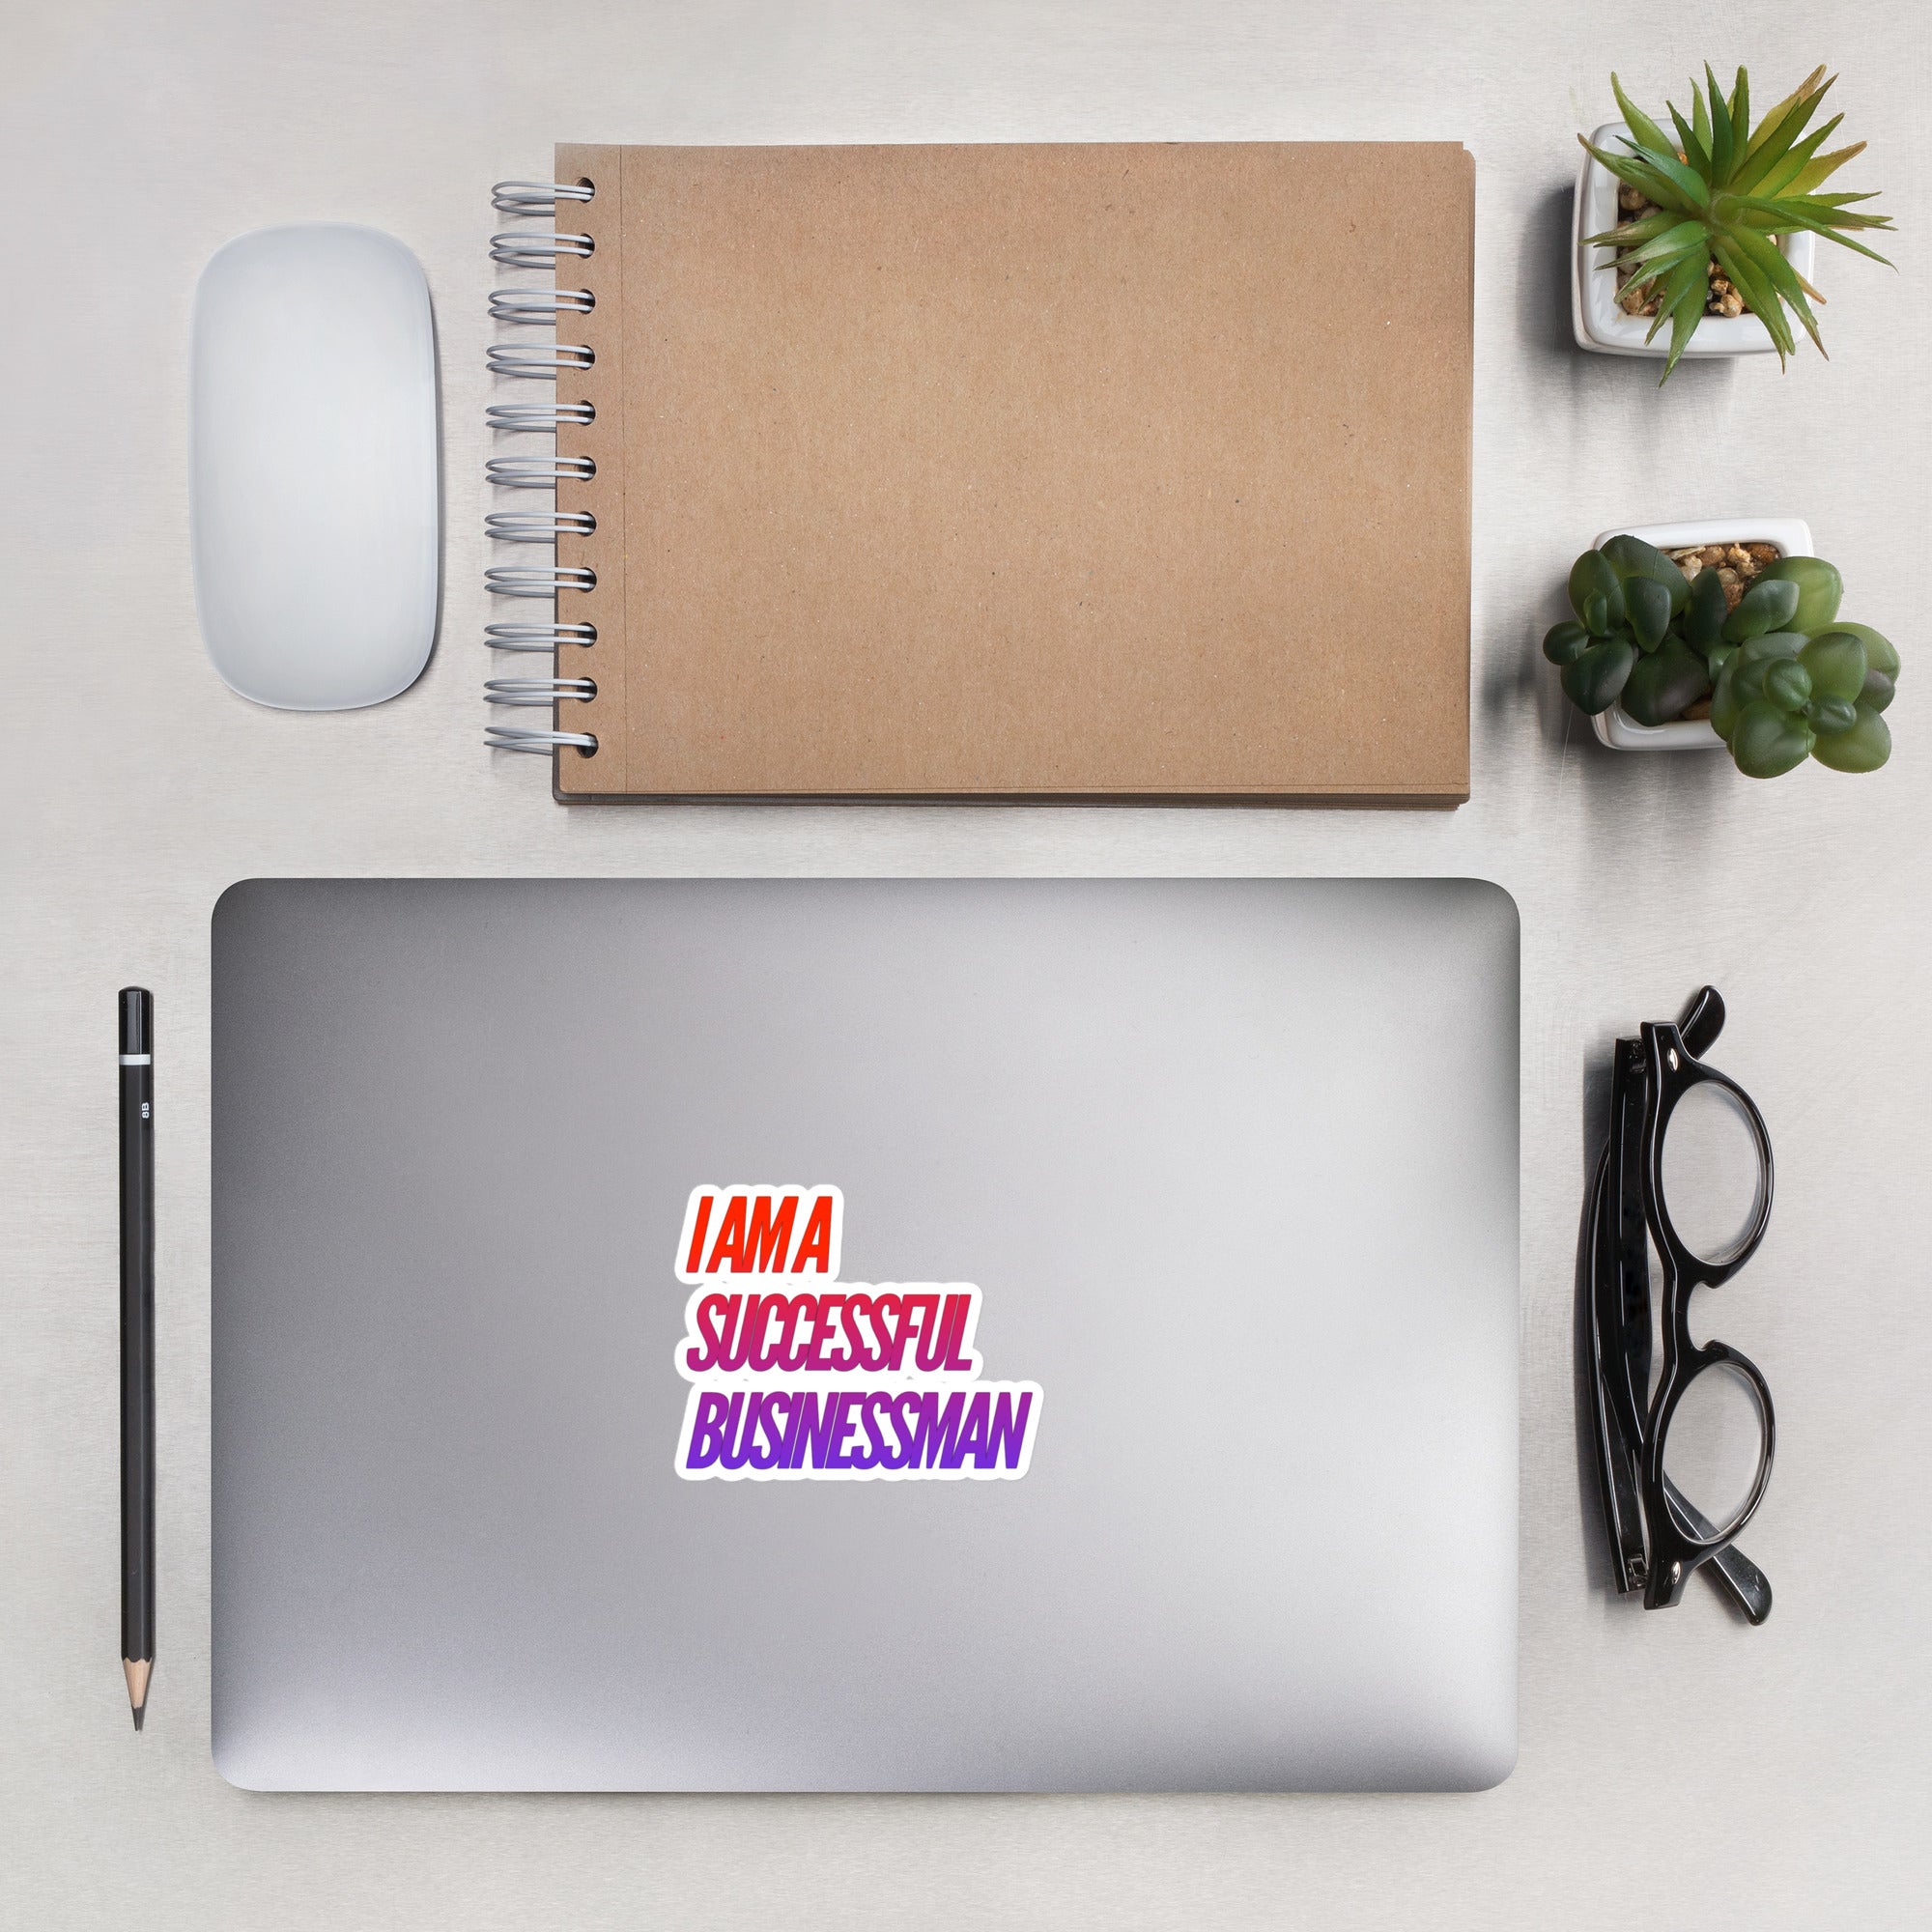 GloWell Designs - Bubble-Free Stickers - Affirmation Quote - I Am a Successful Businessman - GloWell Designs